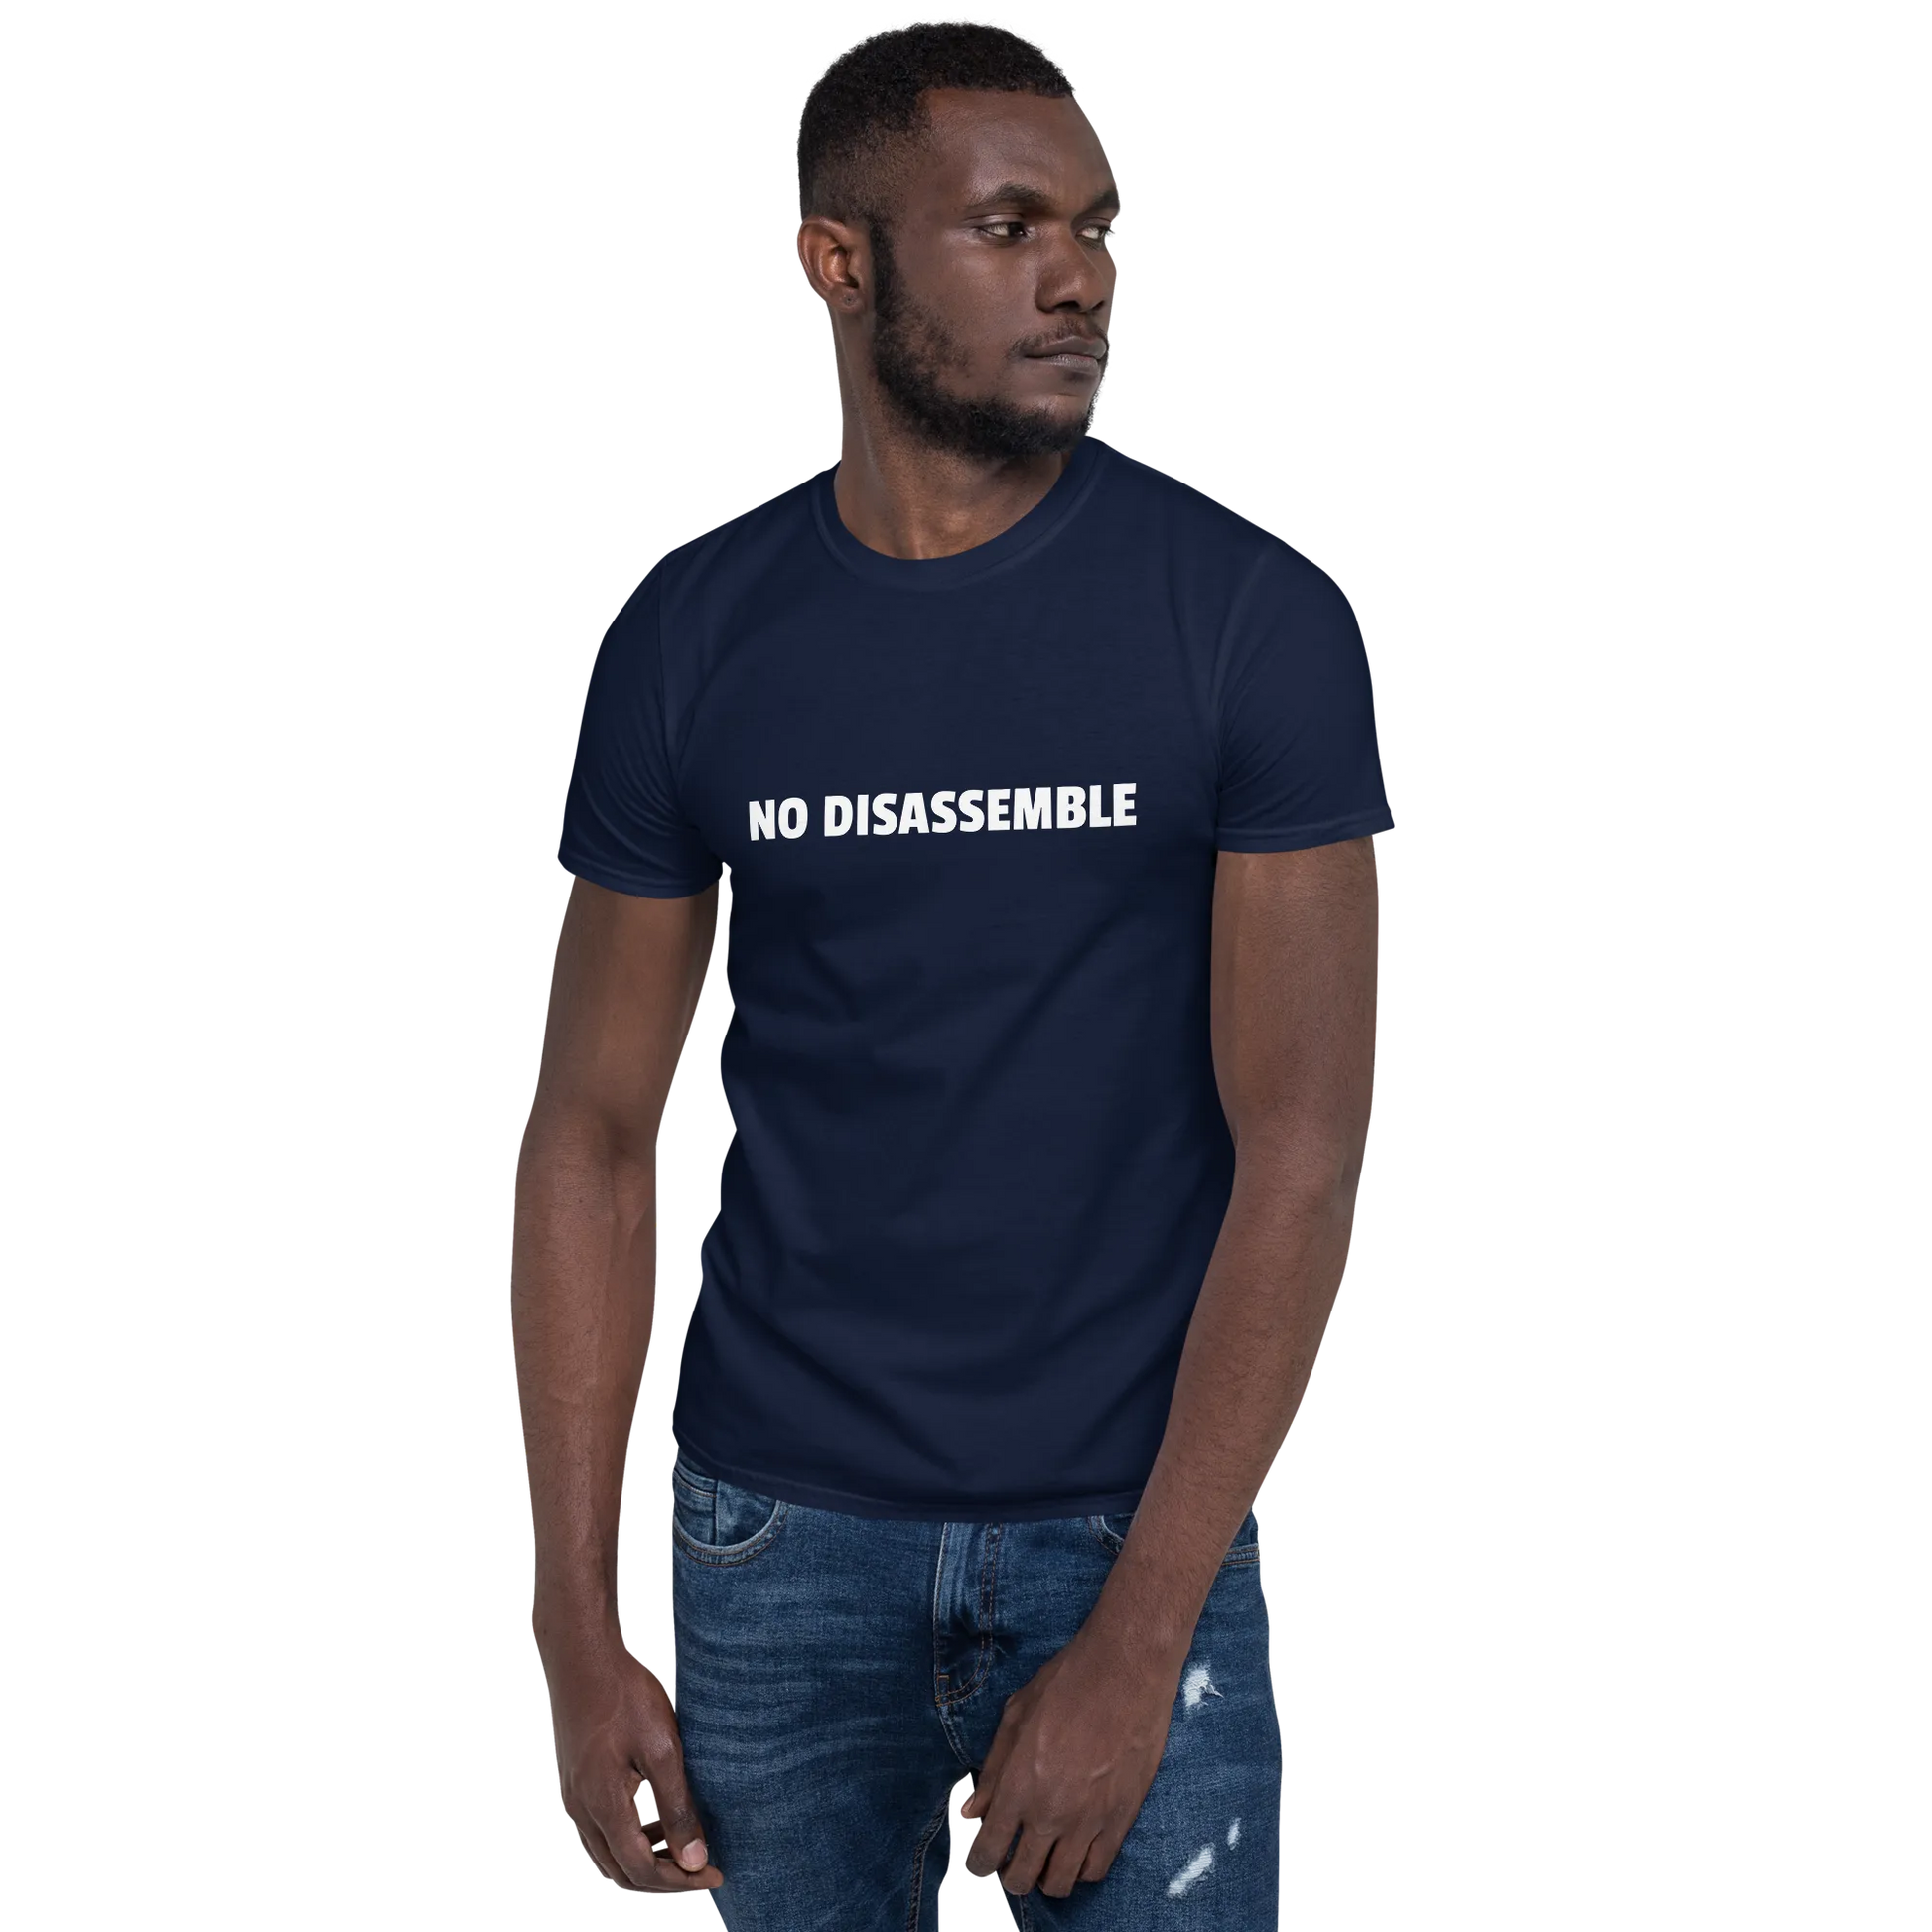 No Disassemble Tee in Navy on man right